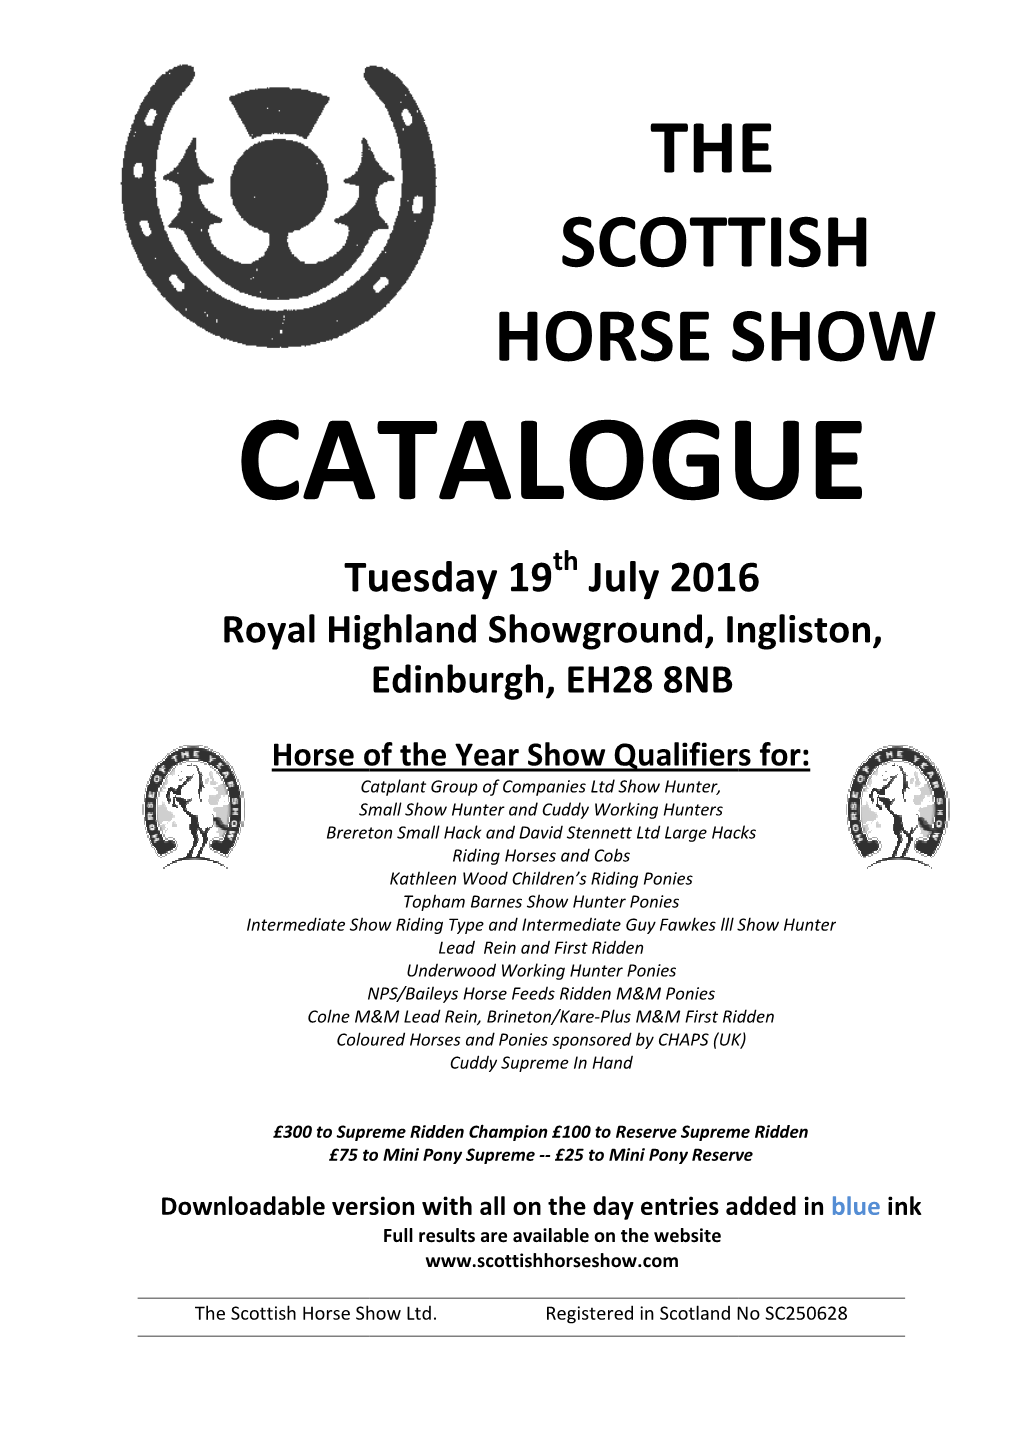 Full Catalogue Plus Entries on the Day 2016